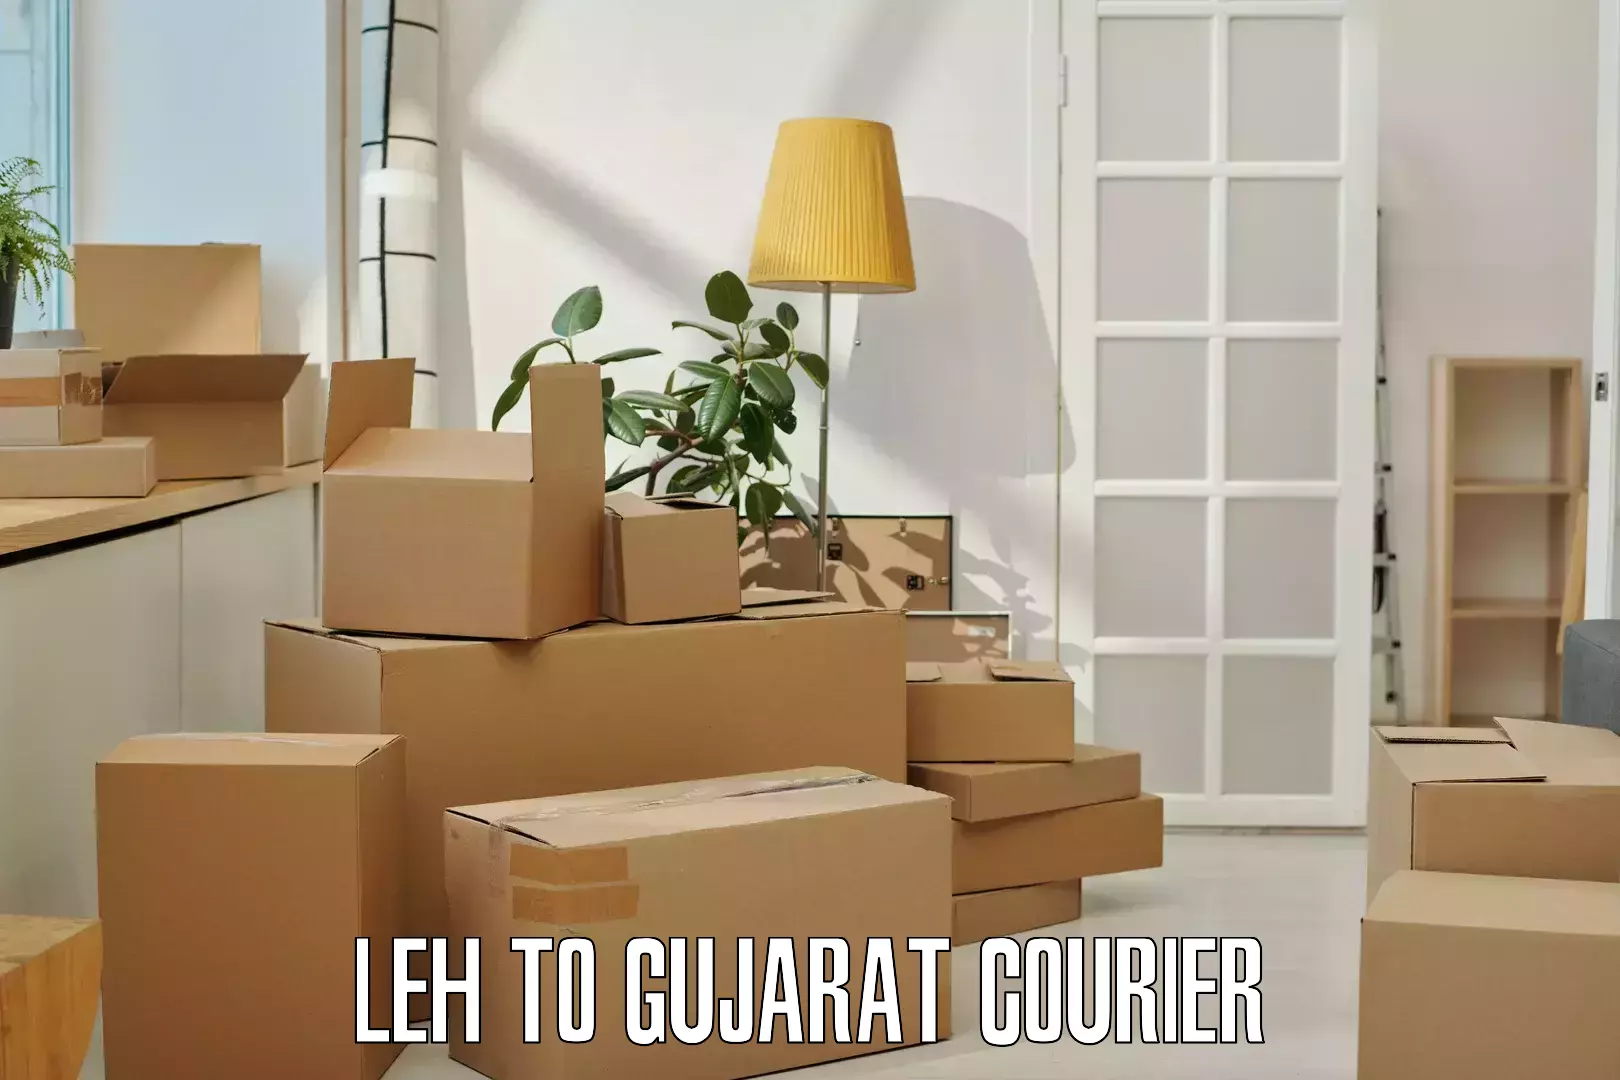 24/7 courier service in Leh to Mahemdavad